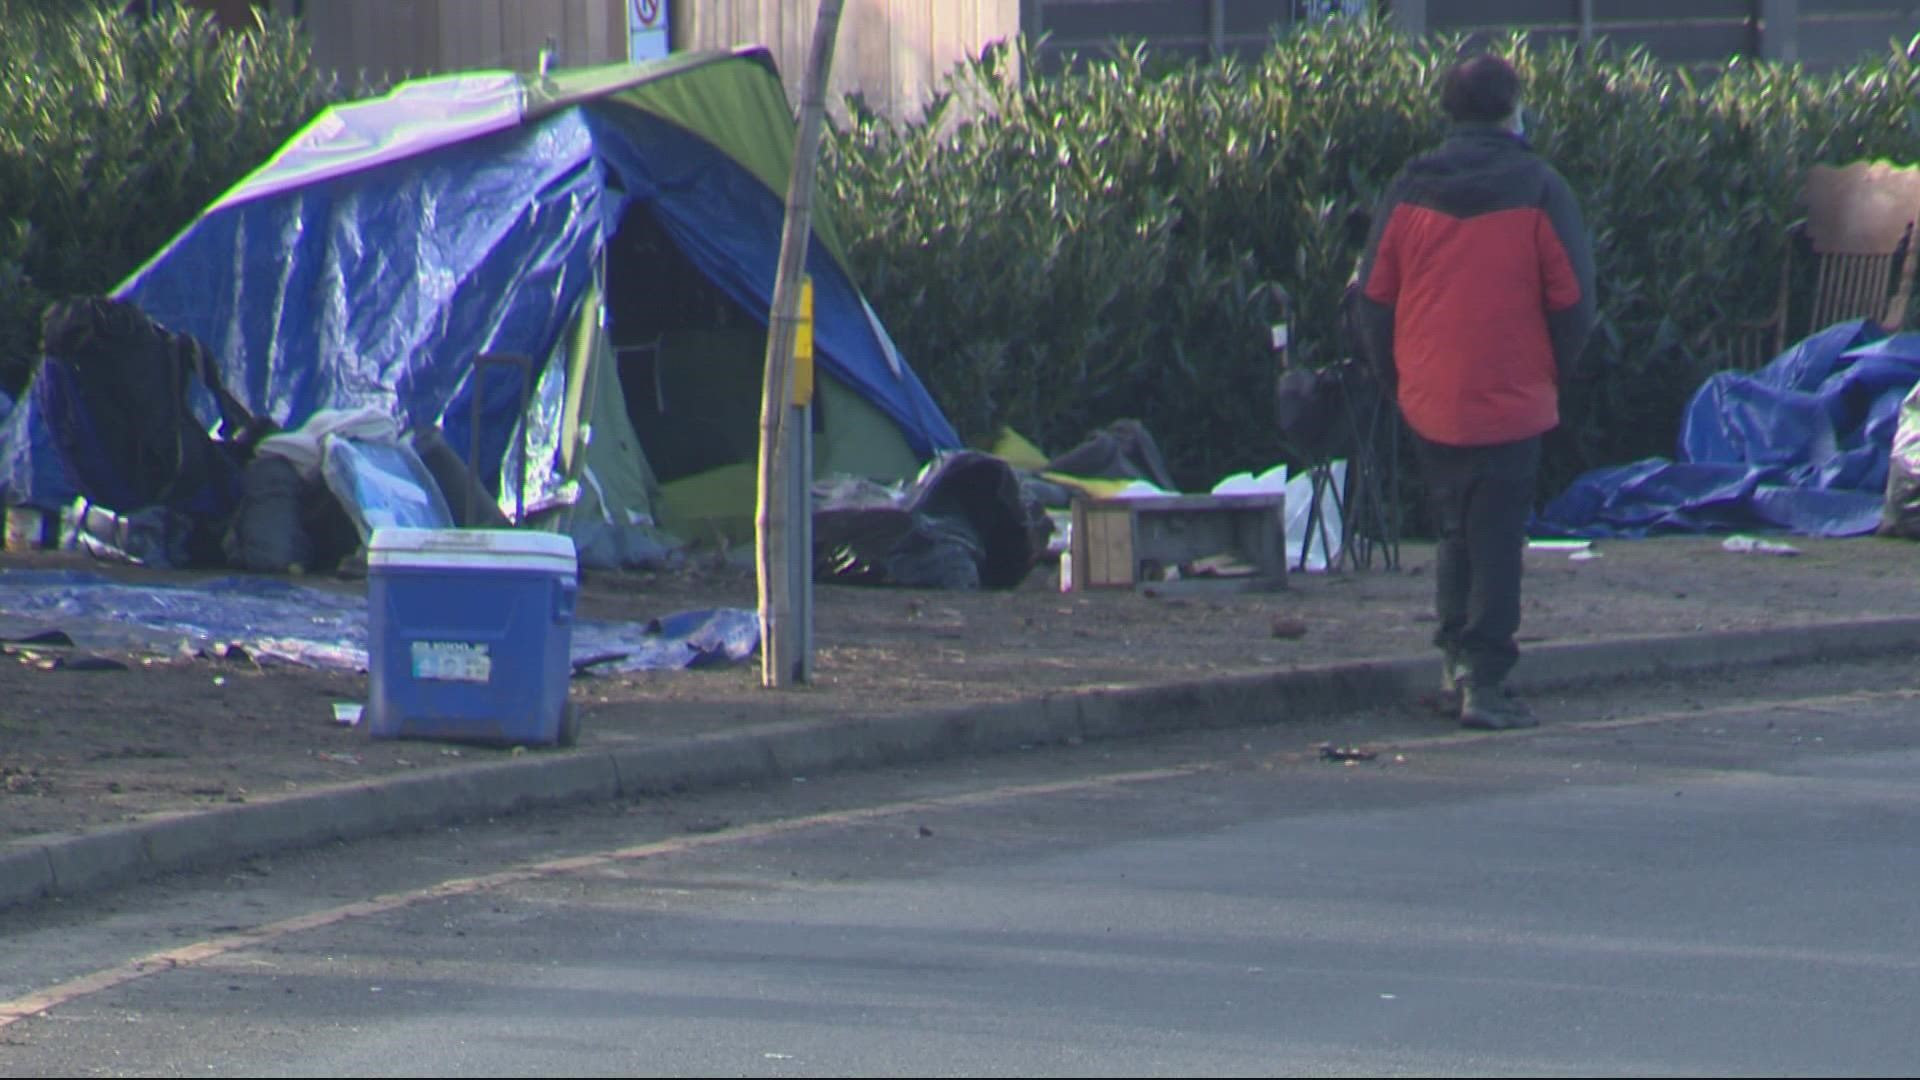 The emergency declaration comes after a concerning new report showing how many homeless people are being killed in traffic incidents.